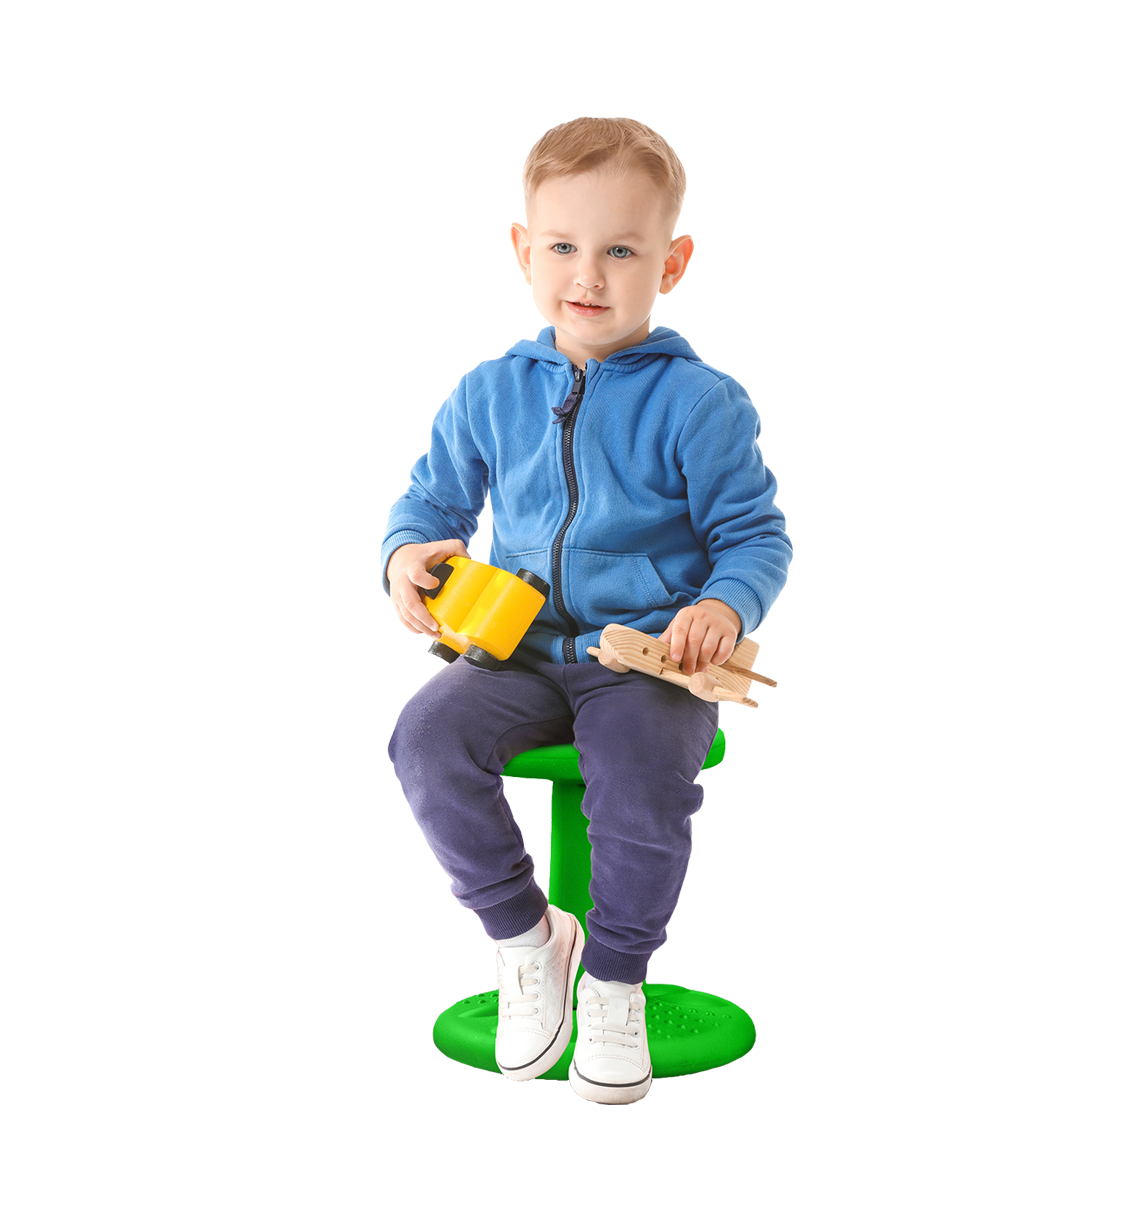 Studico Active Kids Chair Wobble Chairs Juniors/Pre-Teens (Grades 3-7) - Flexible Seating Classroom- Children Who Cant Sit Still - 17.75 inch Wobble